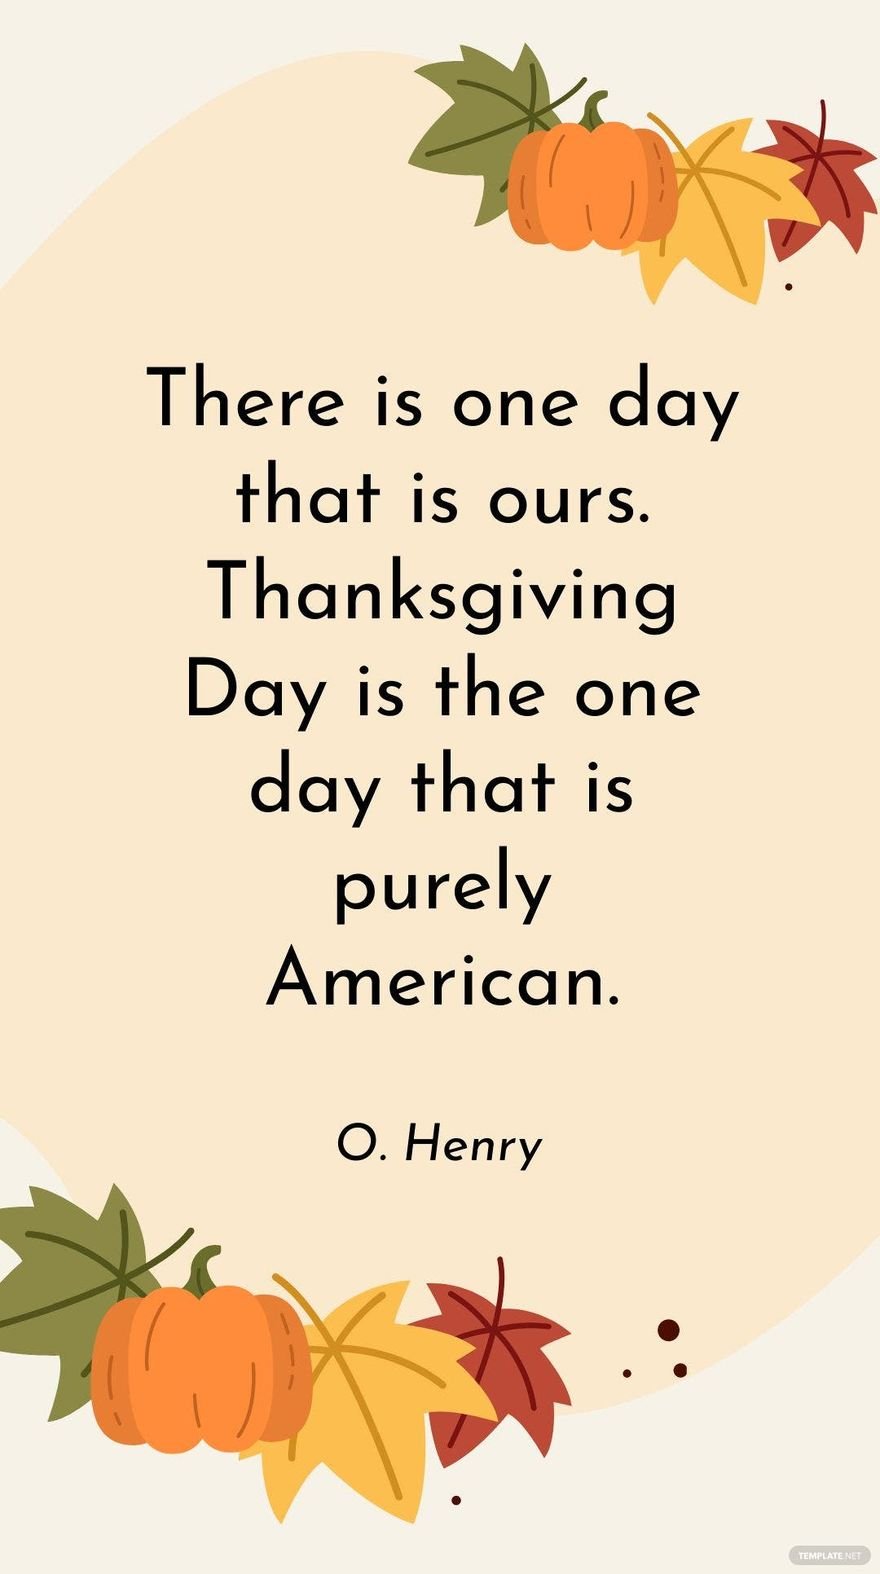 O. Henry - There is one day that is ours. Thanksgiving Day is the one day that is purely American. in JPG